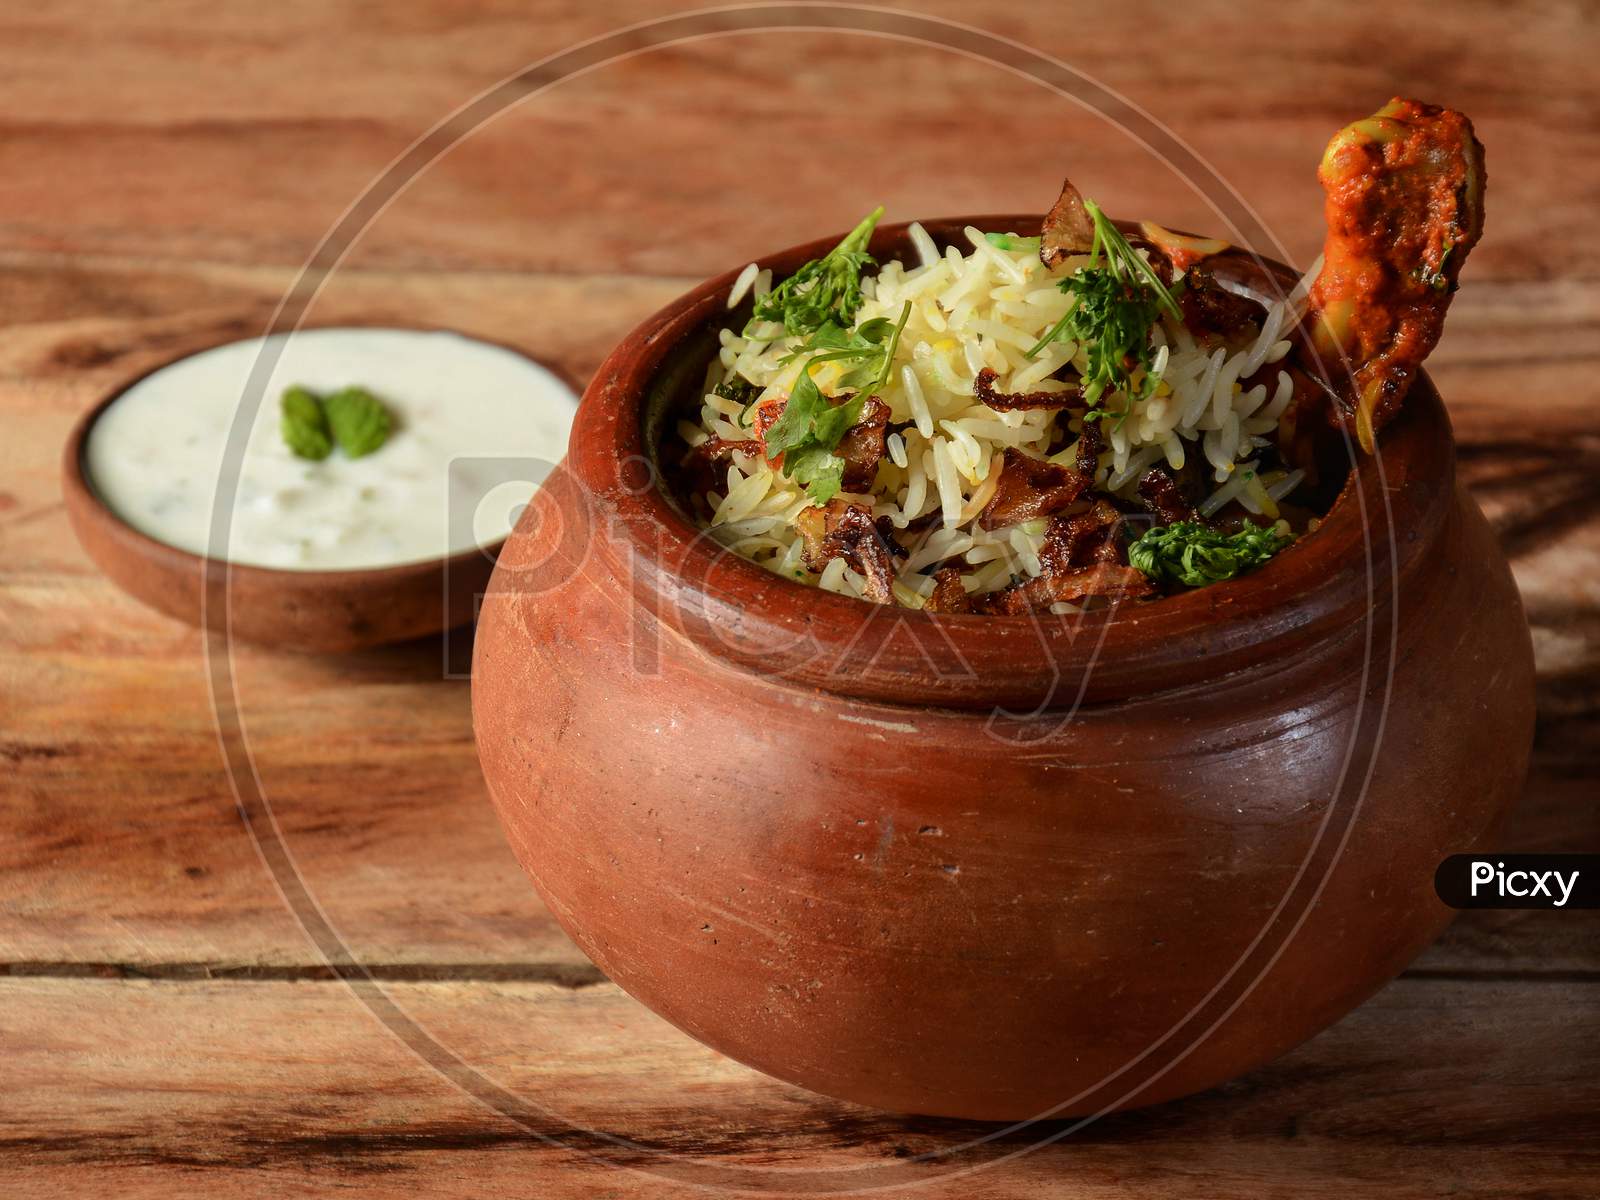 Traditional Murgh Dum Biryani Made Of Basmati Rice Cooked With Masala Spices, Served With Yogurt On Traditional Clay Pot, Selective Focus